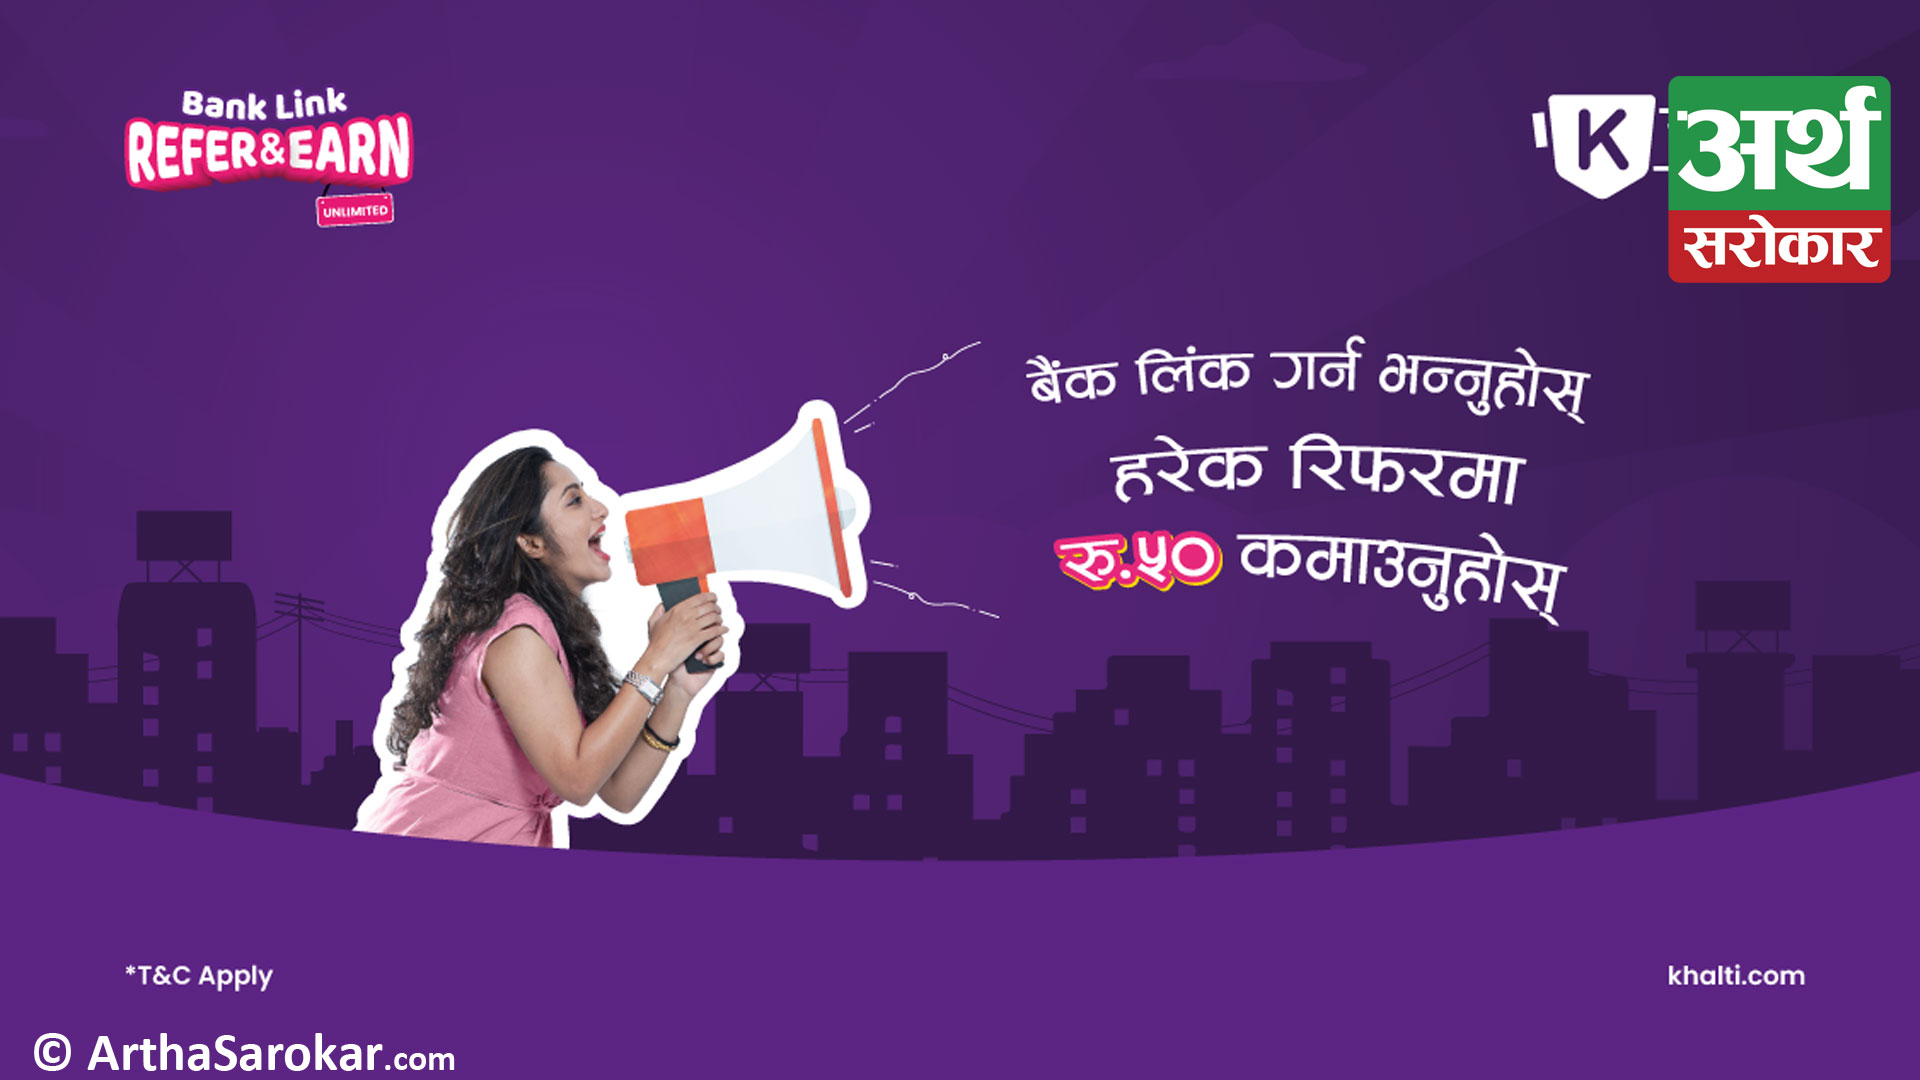 Khalti brings back Refer and Earn Campaign, this time on “Bank Link”